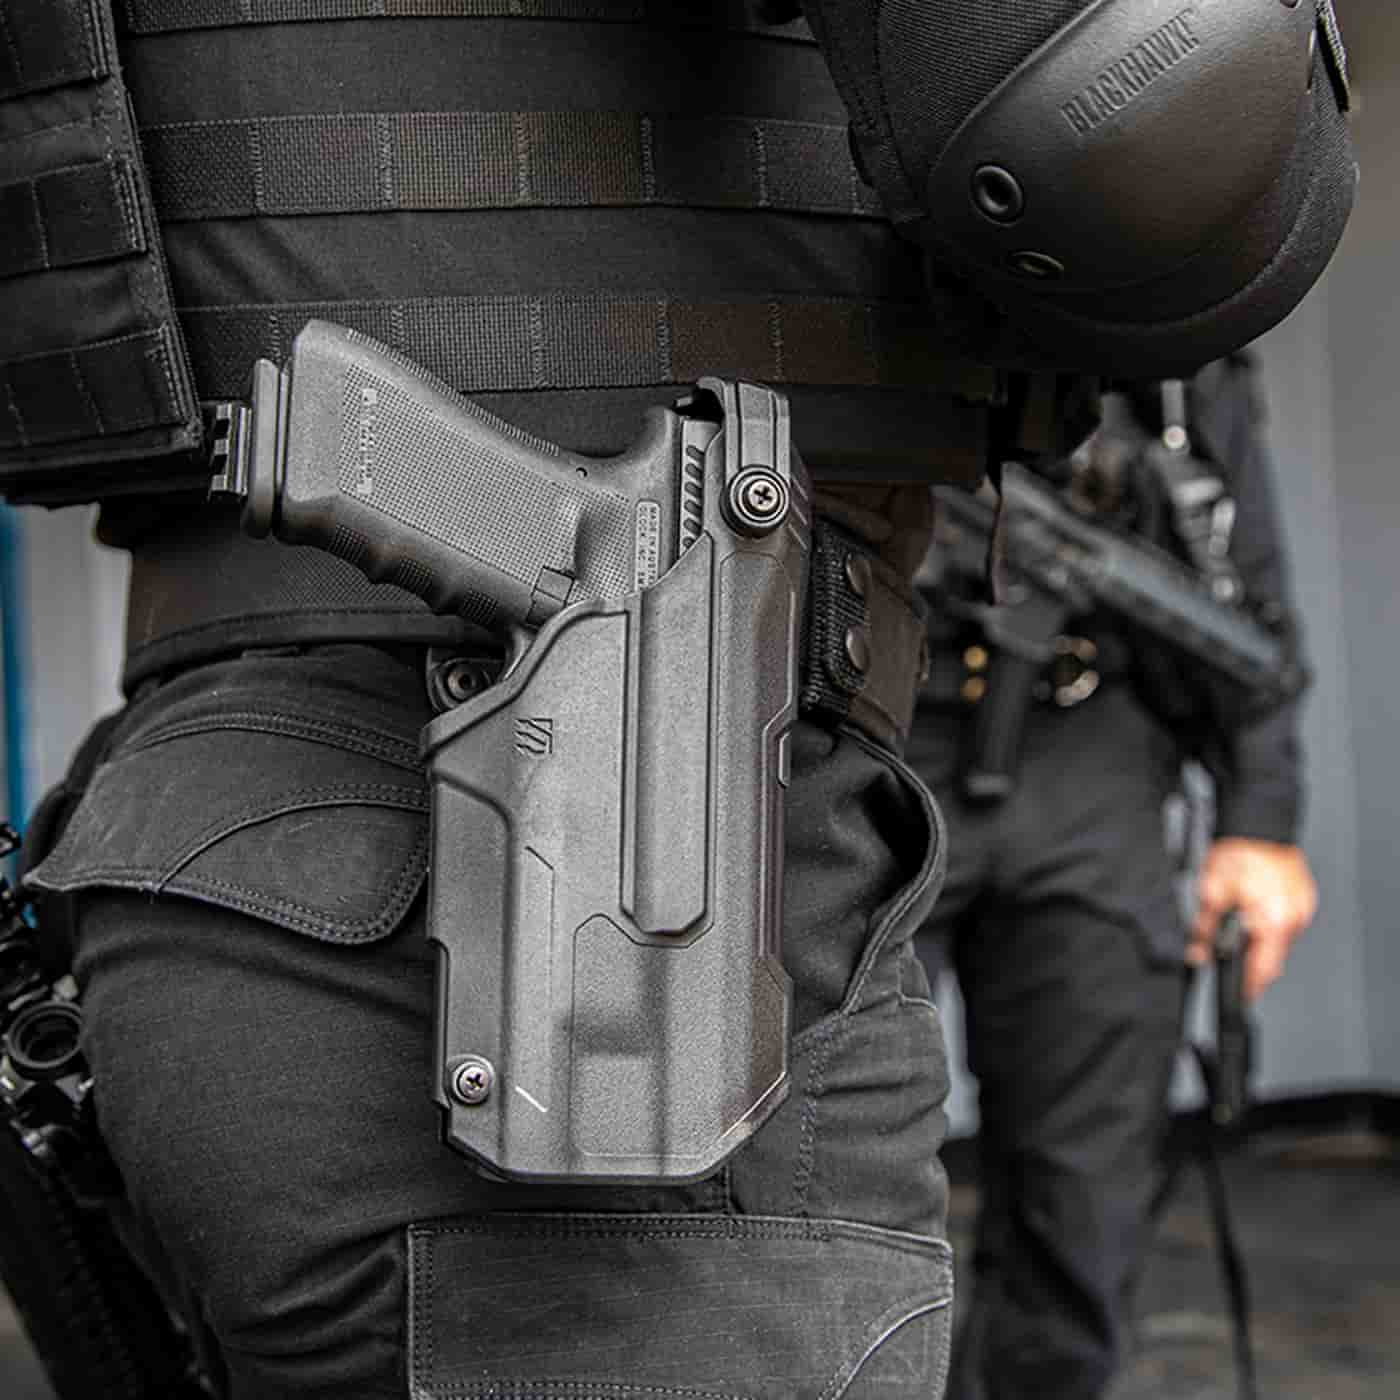 Blackhawk Lands T-Series Holster Contract Worth $2.1 Million With Belgian  Federal Police